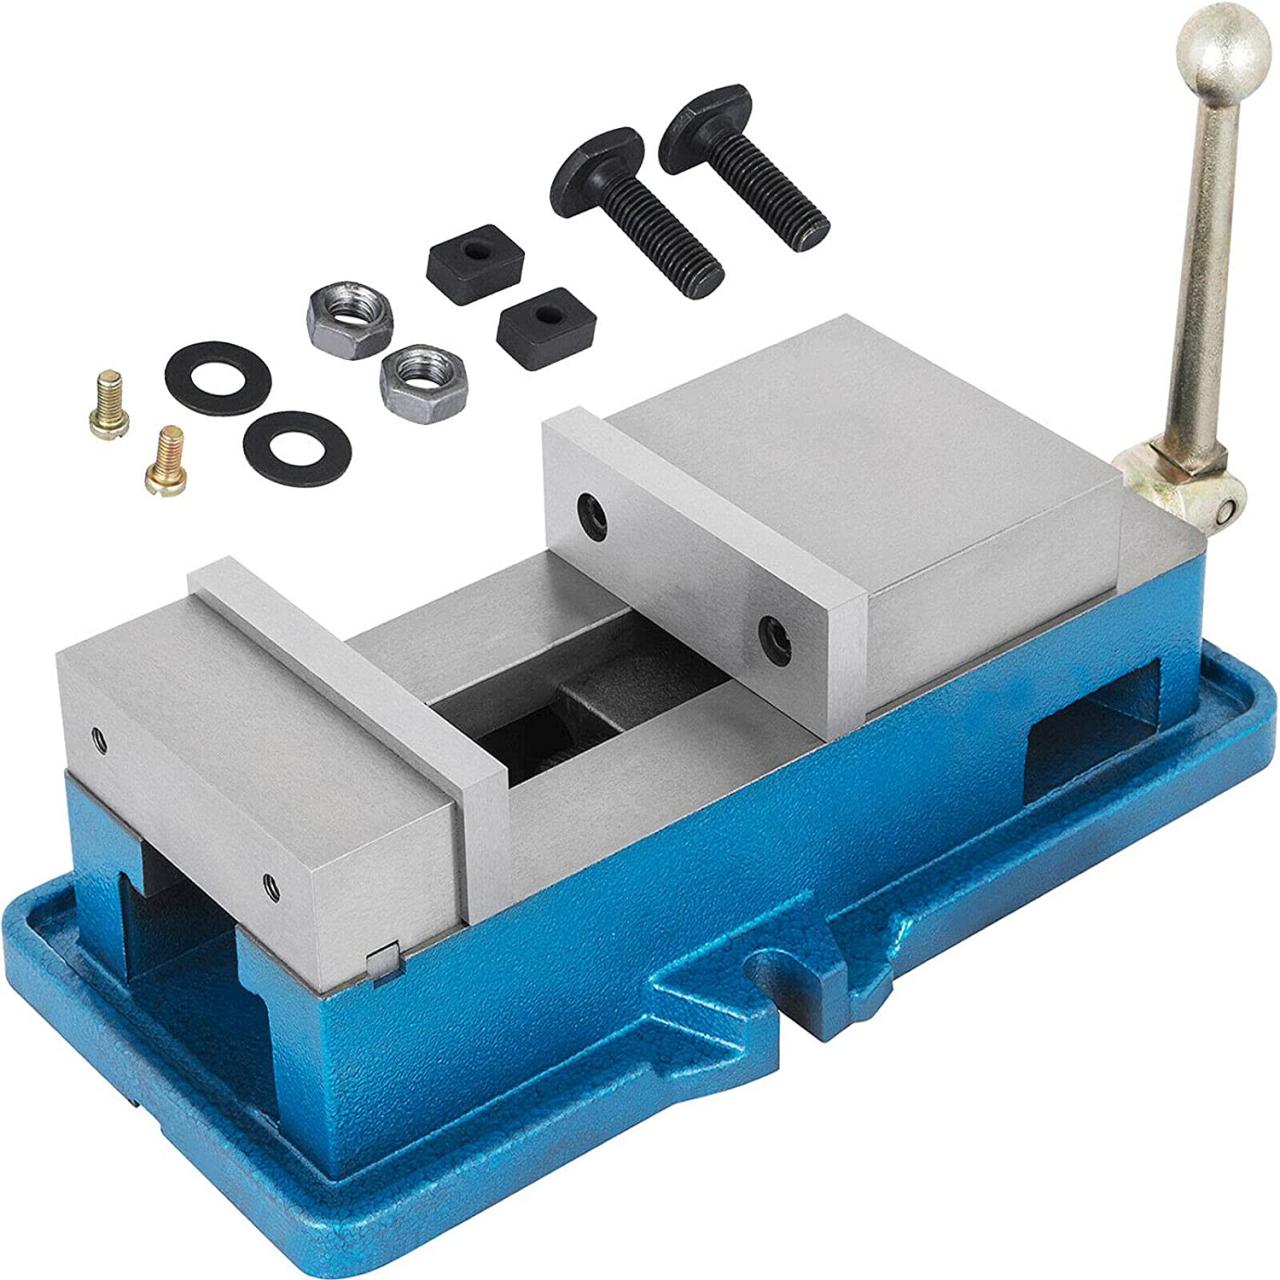 Buy Happybuy 4 Inch ACCU Lock Down Vise Precision Milling Vise 4 Inch Jaw  Width Drill Press Vise Milling Drilling Machine Bench Clamp Clamping Vice(4)  Online in Hong Kong. B07F8PBQRH